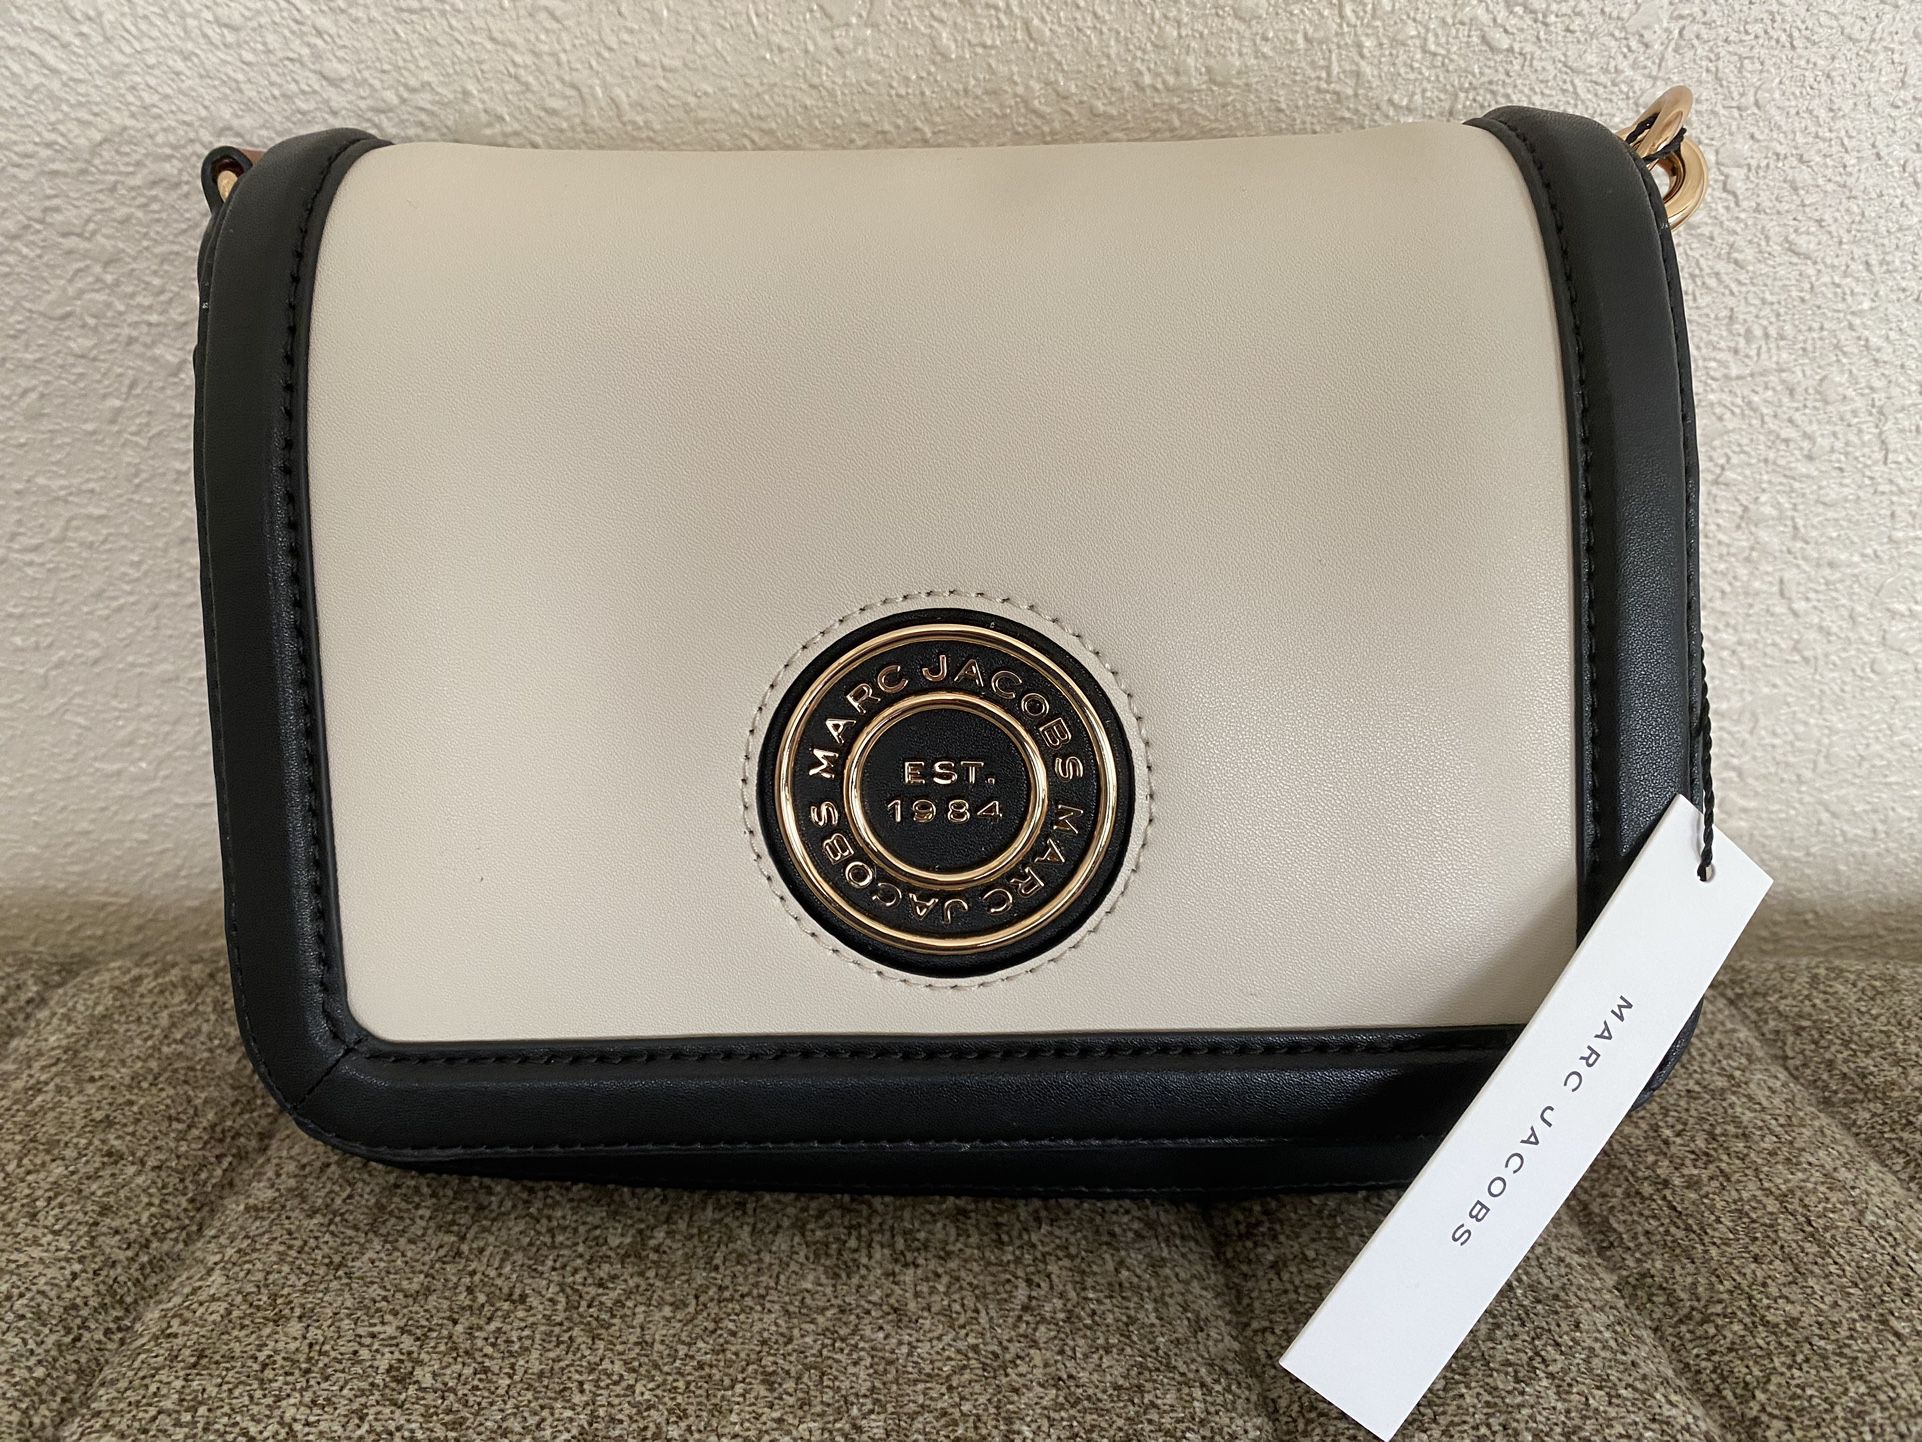 NEW Marc Jacobs Shoulder Bag In Smoked Almond